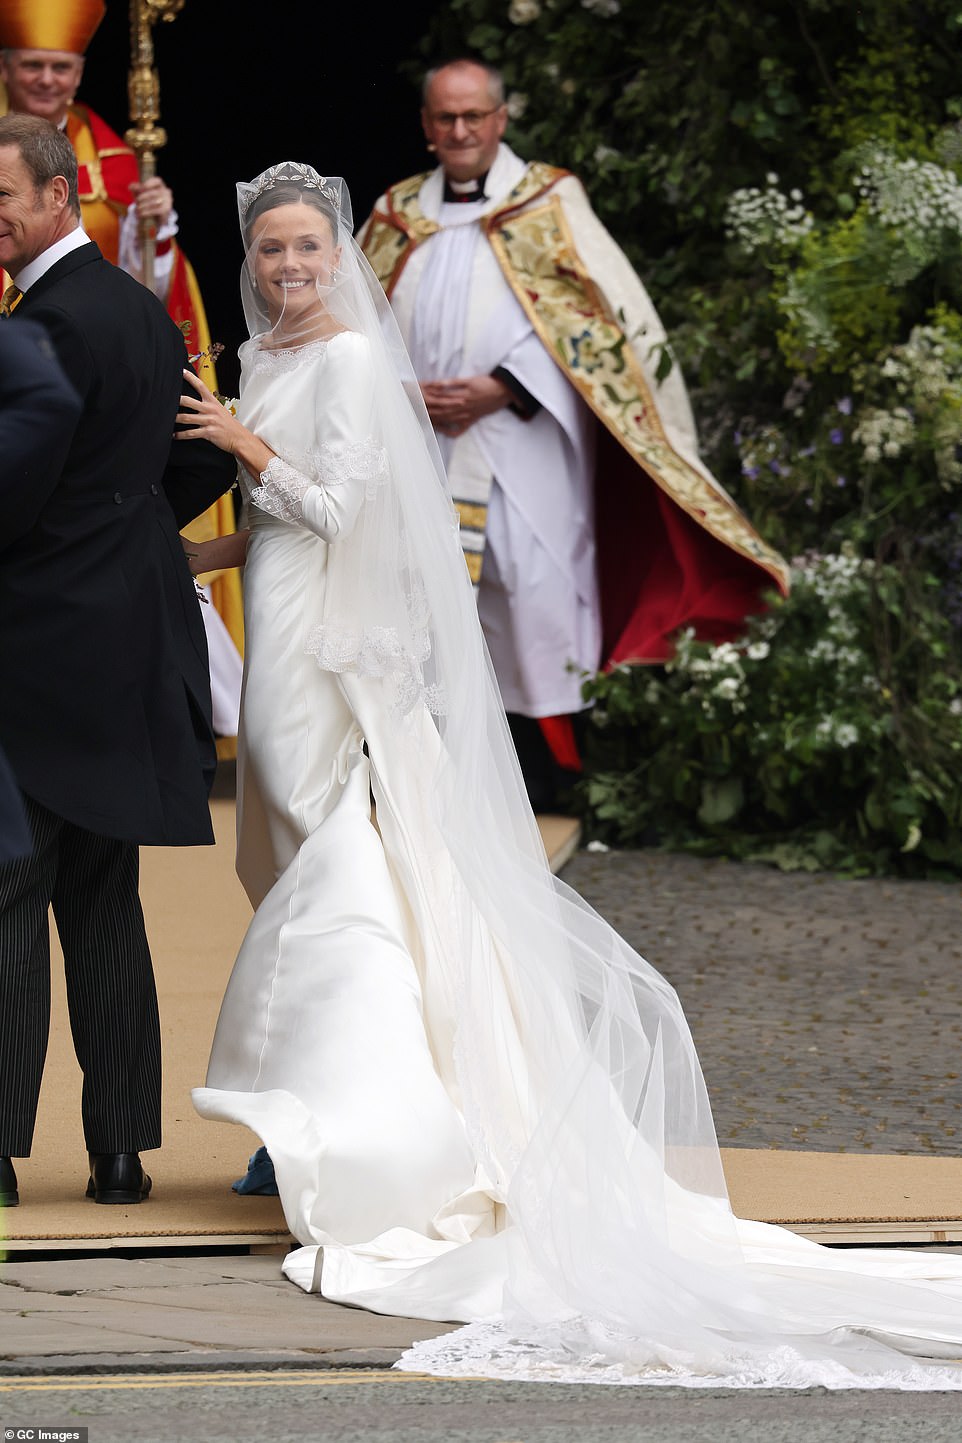 Olivia Henson arrives at her wedding to the The Duke of Westminster